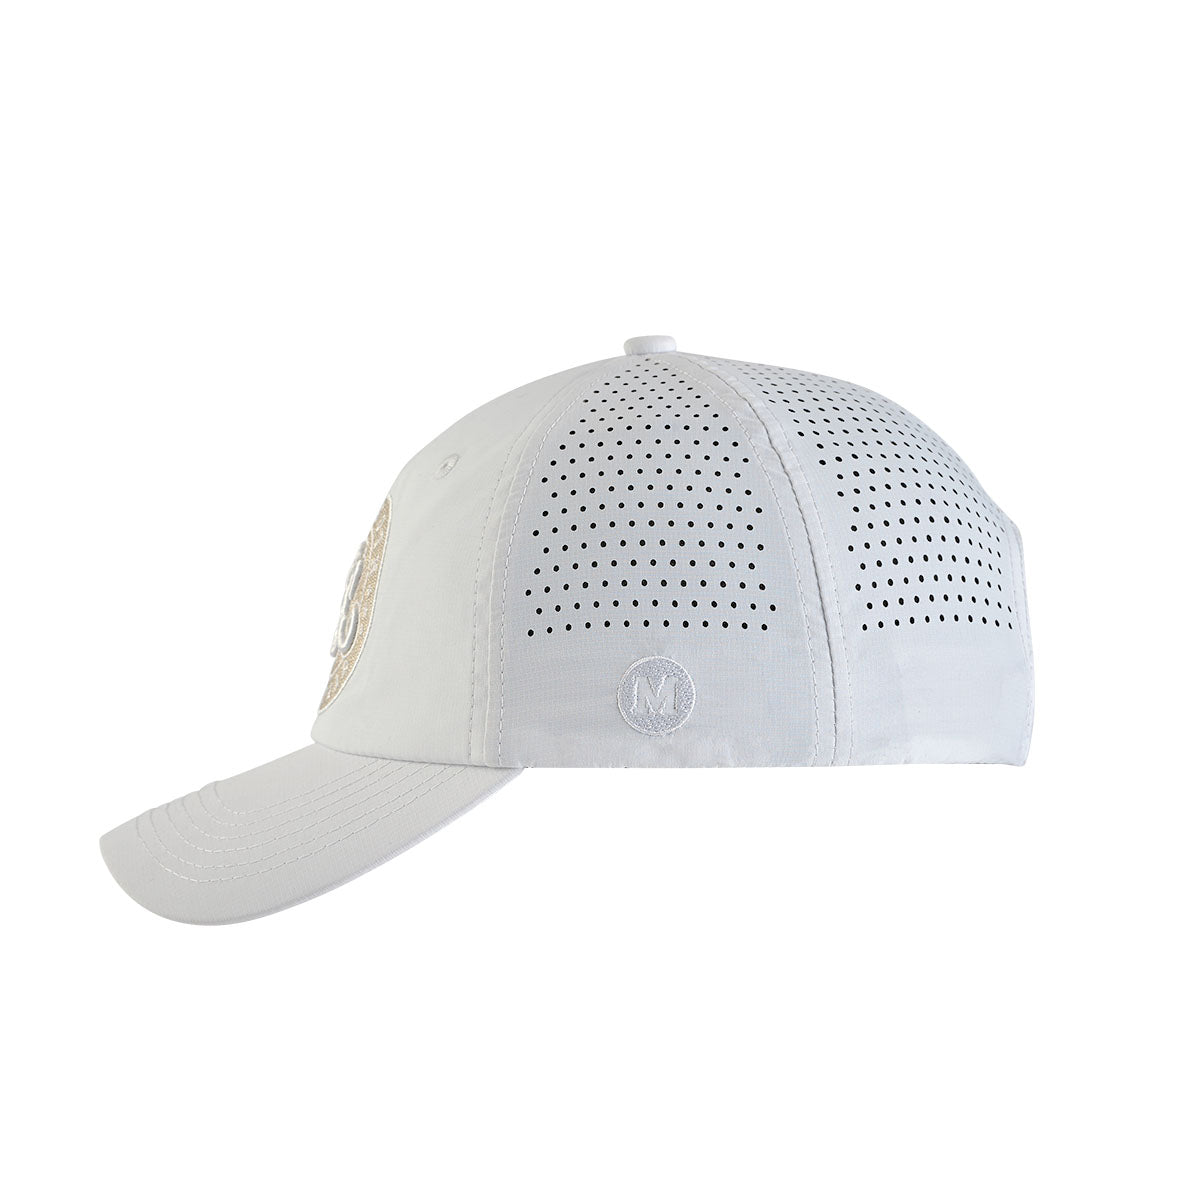 White Snapback Classic - Finest - Performance Mammoth Its Headwear at